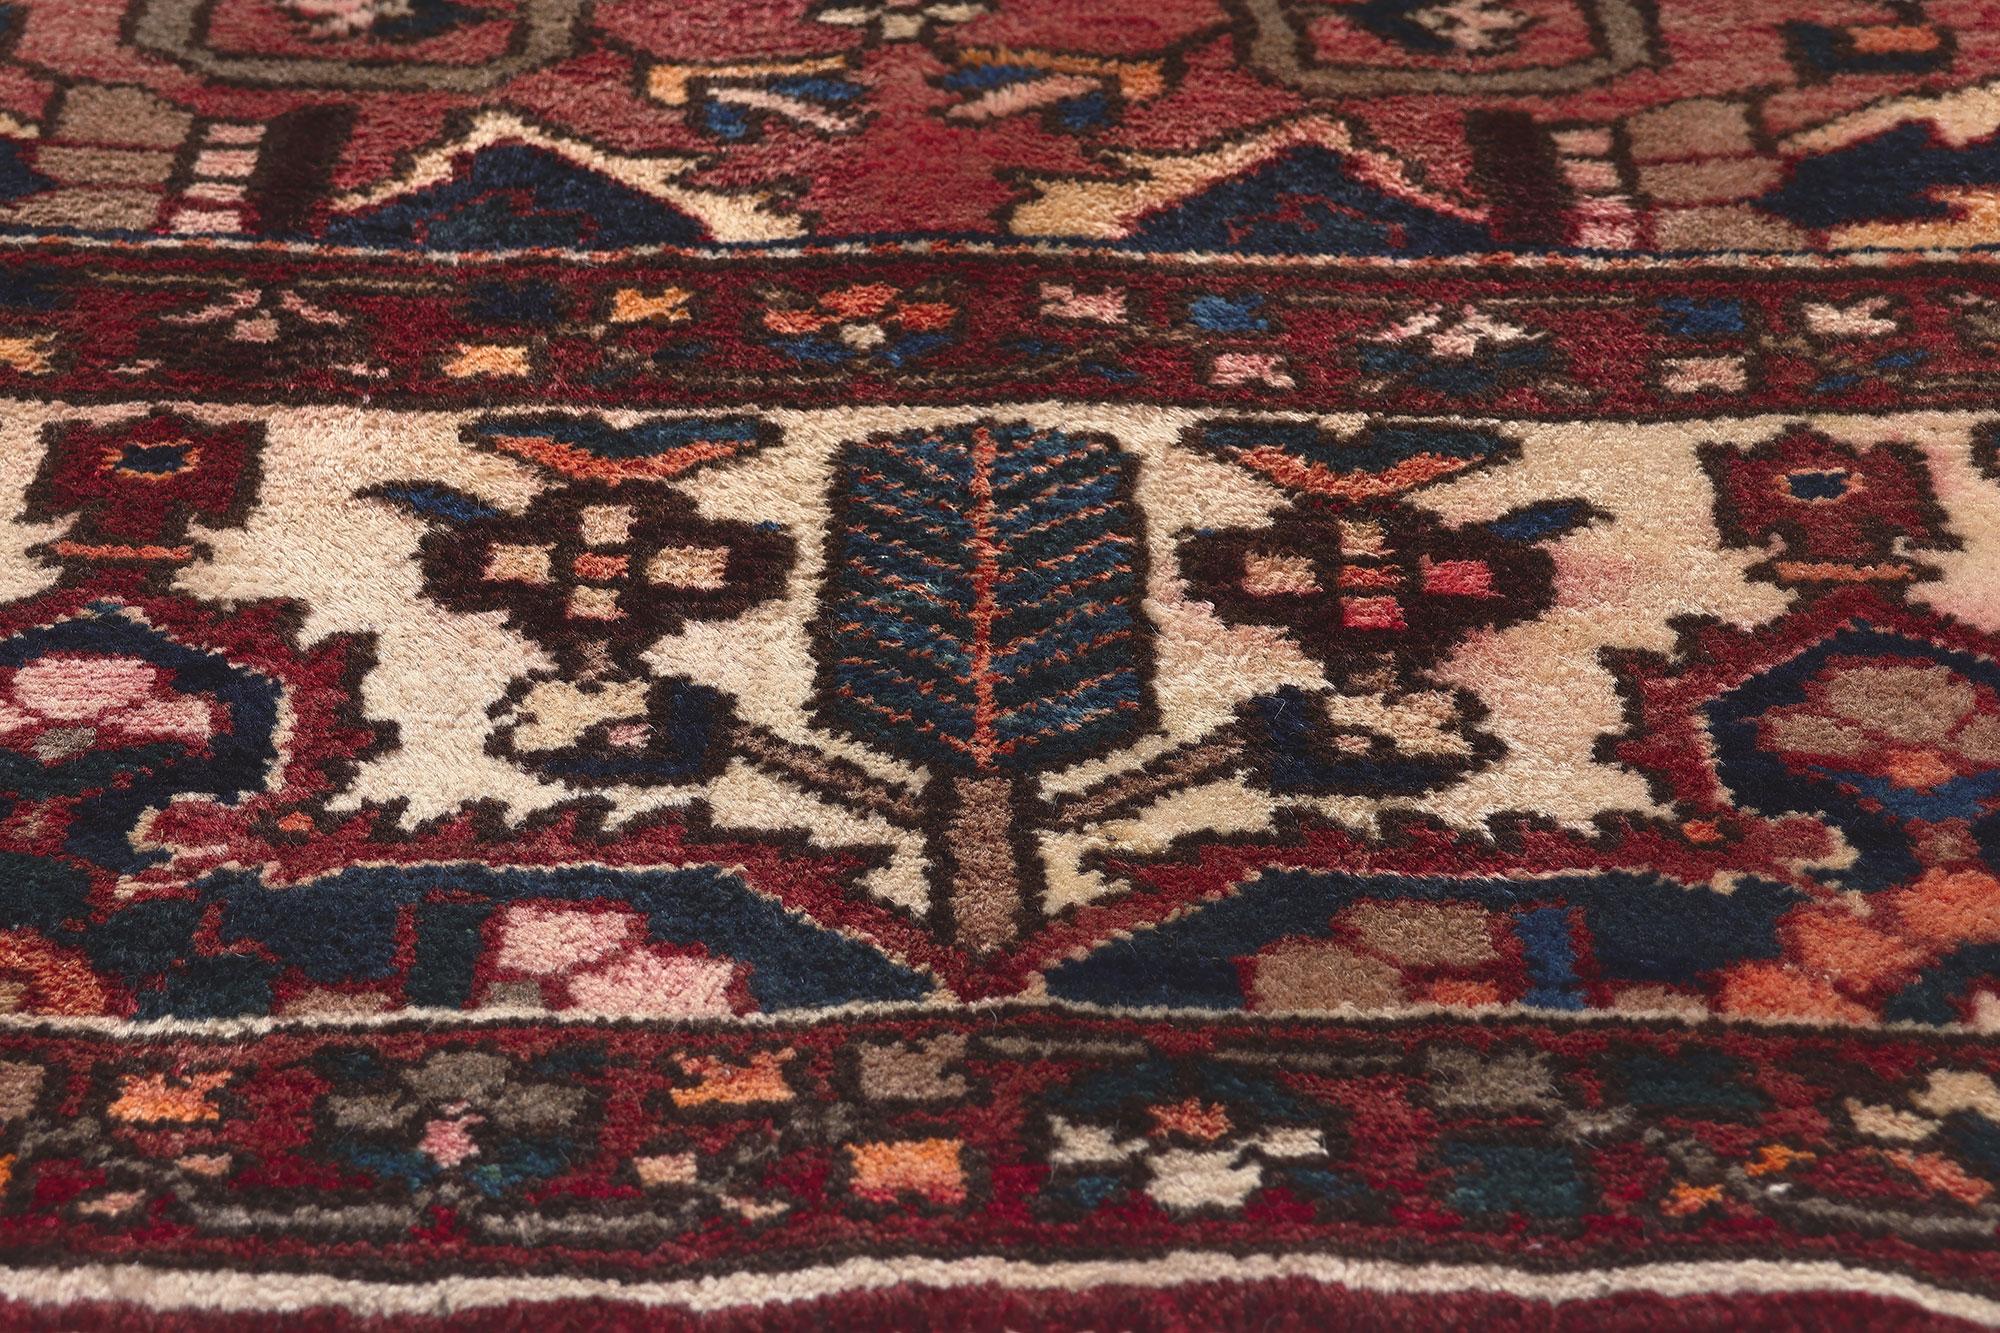 Antique Persian Bakhtiari Rug, Ivy League Style Meets Traditional Sensibility In Good Condition For Sale In Dallas, TX